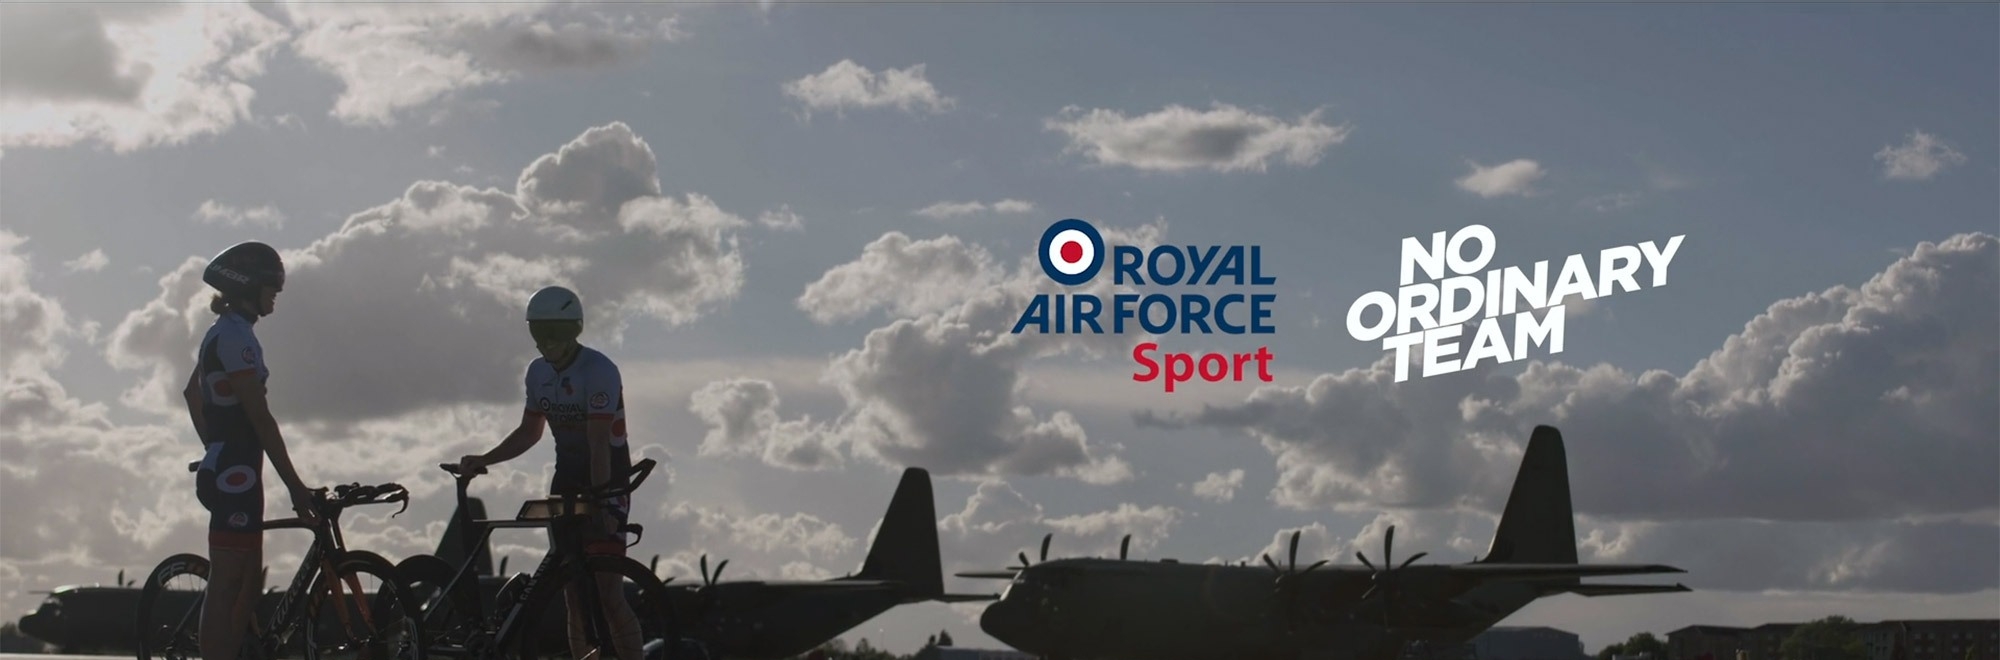 RAF ad highlights the importance of sport and adventure to recruits